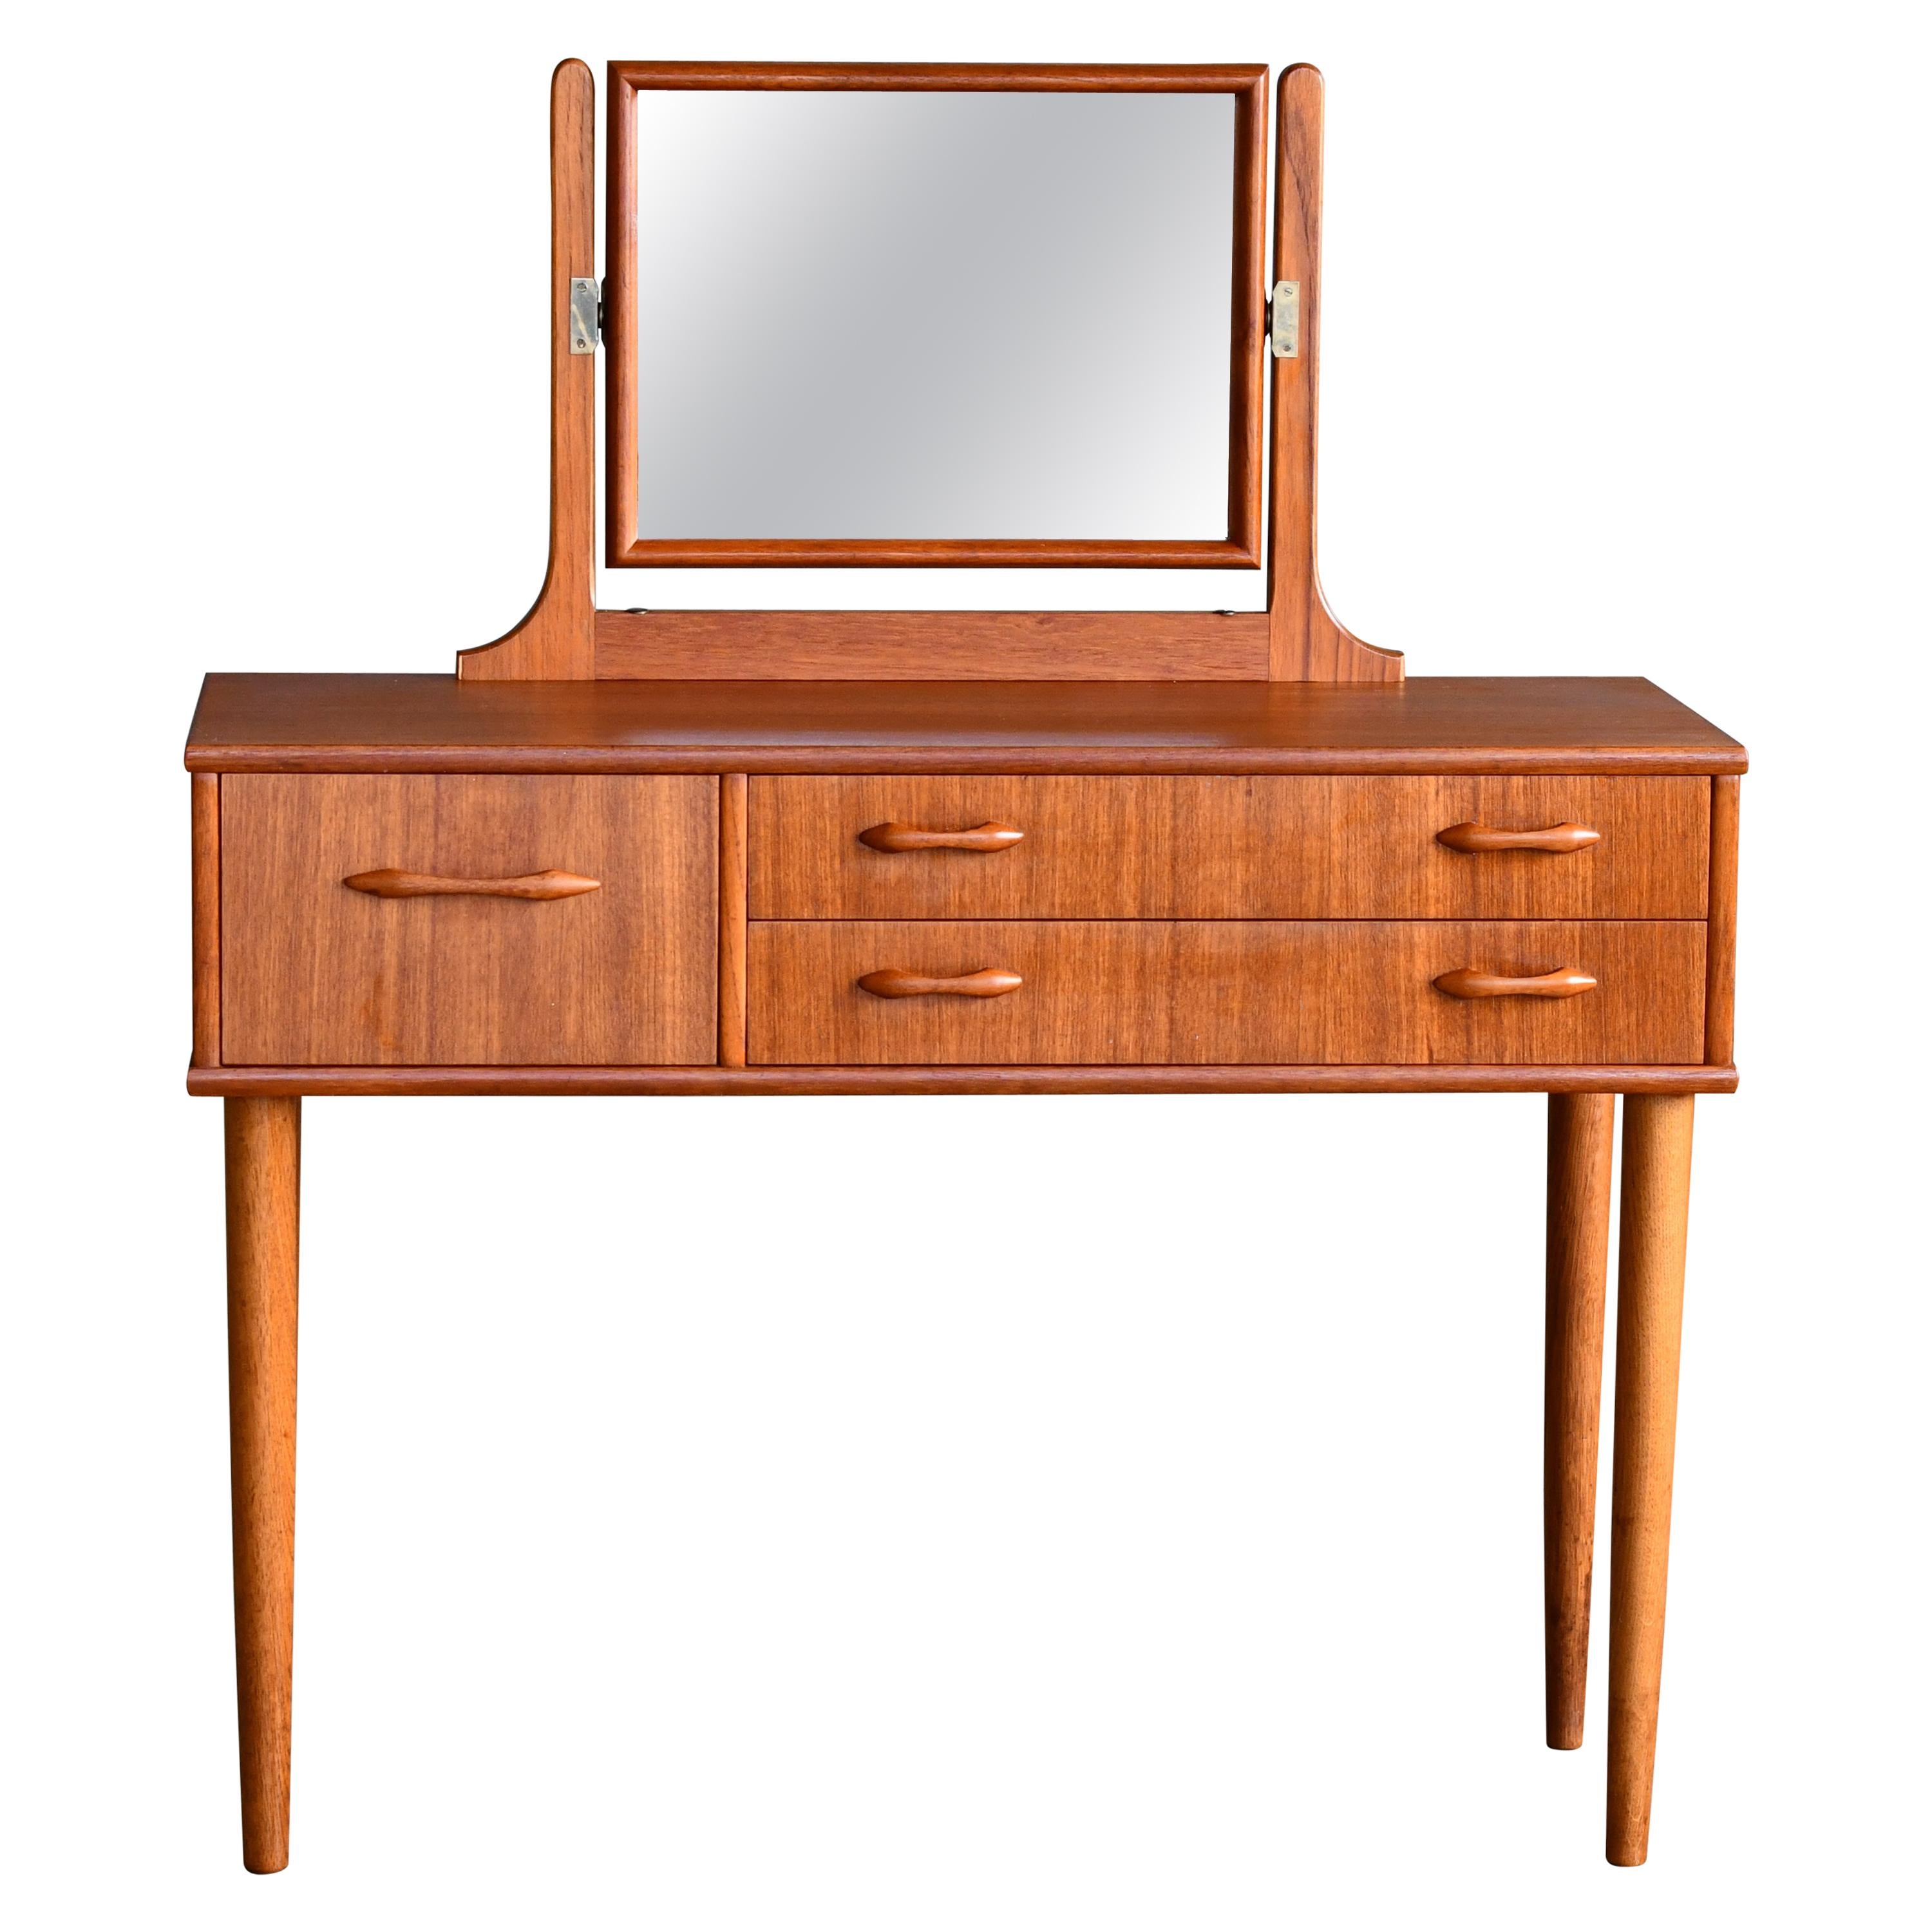 Danish Midcentury Vanity or Dressing Table in Teak with Mirror and Drawers